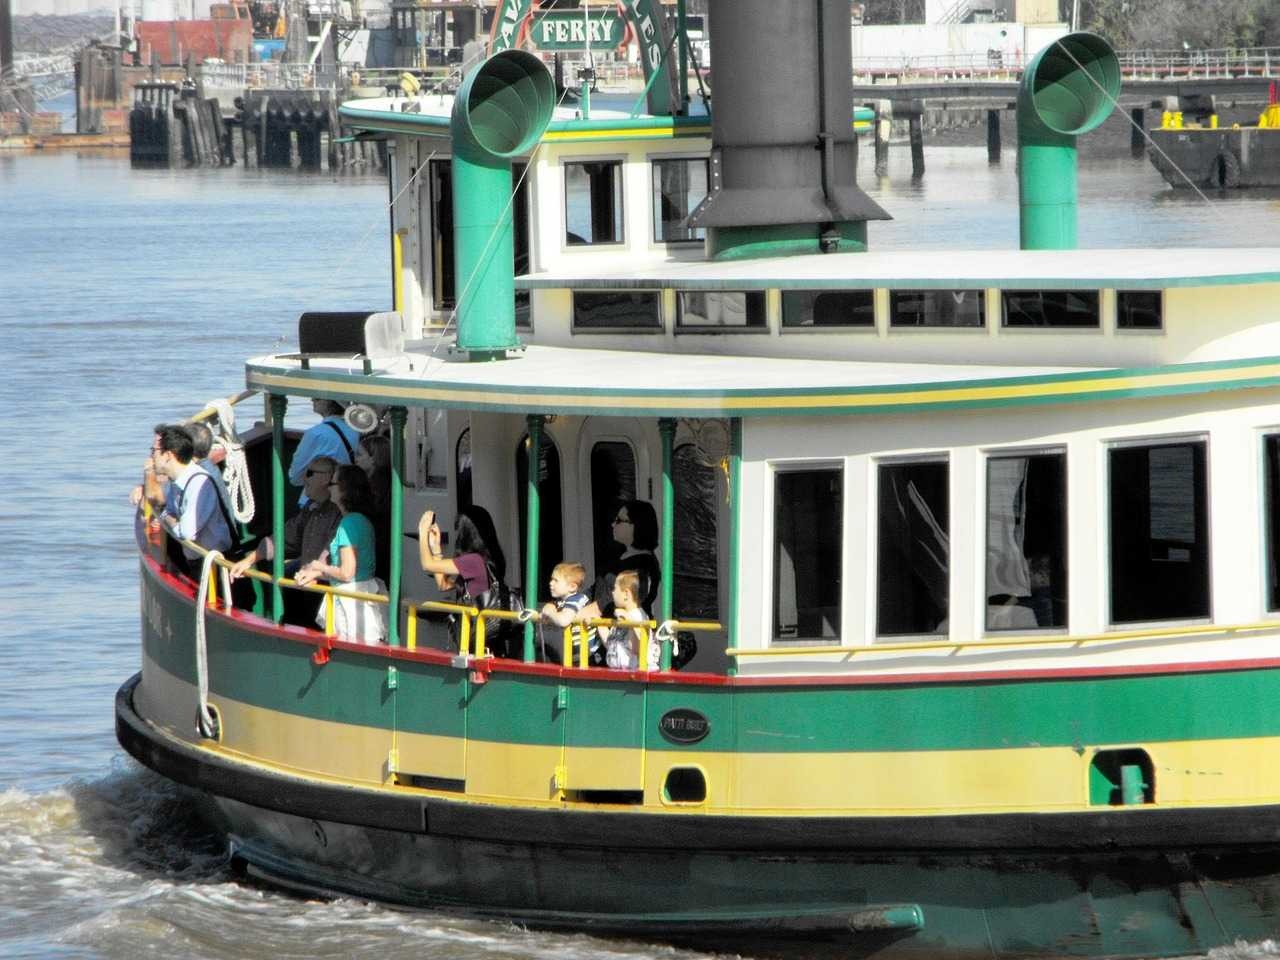 Ferry boat image classifcation dataset for machine learning